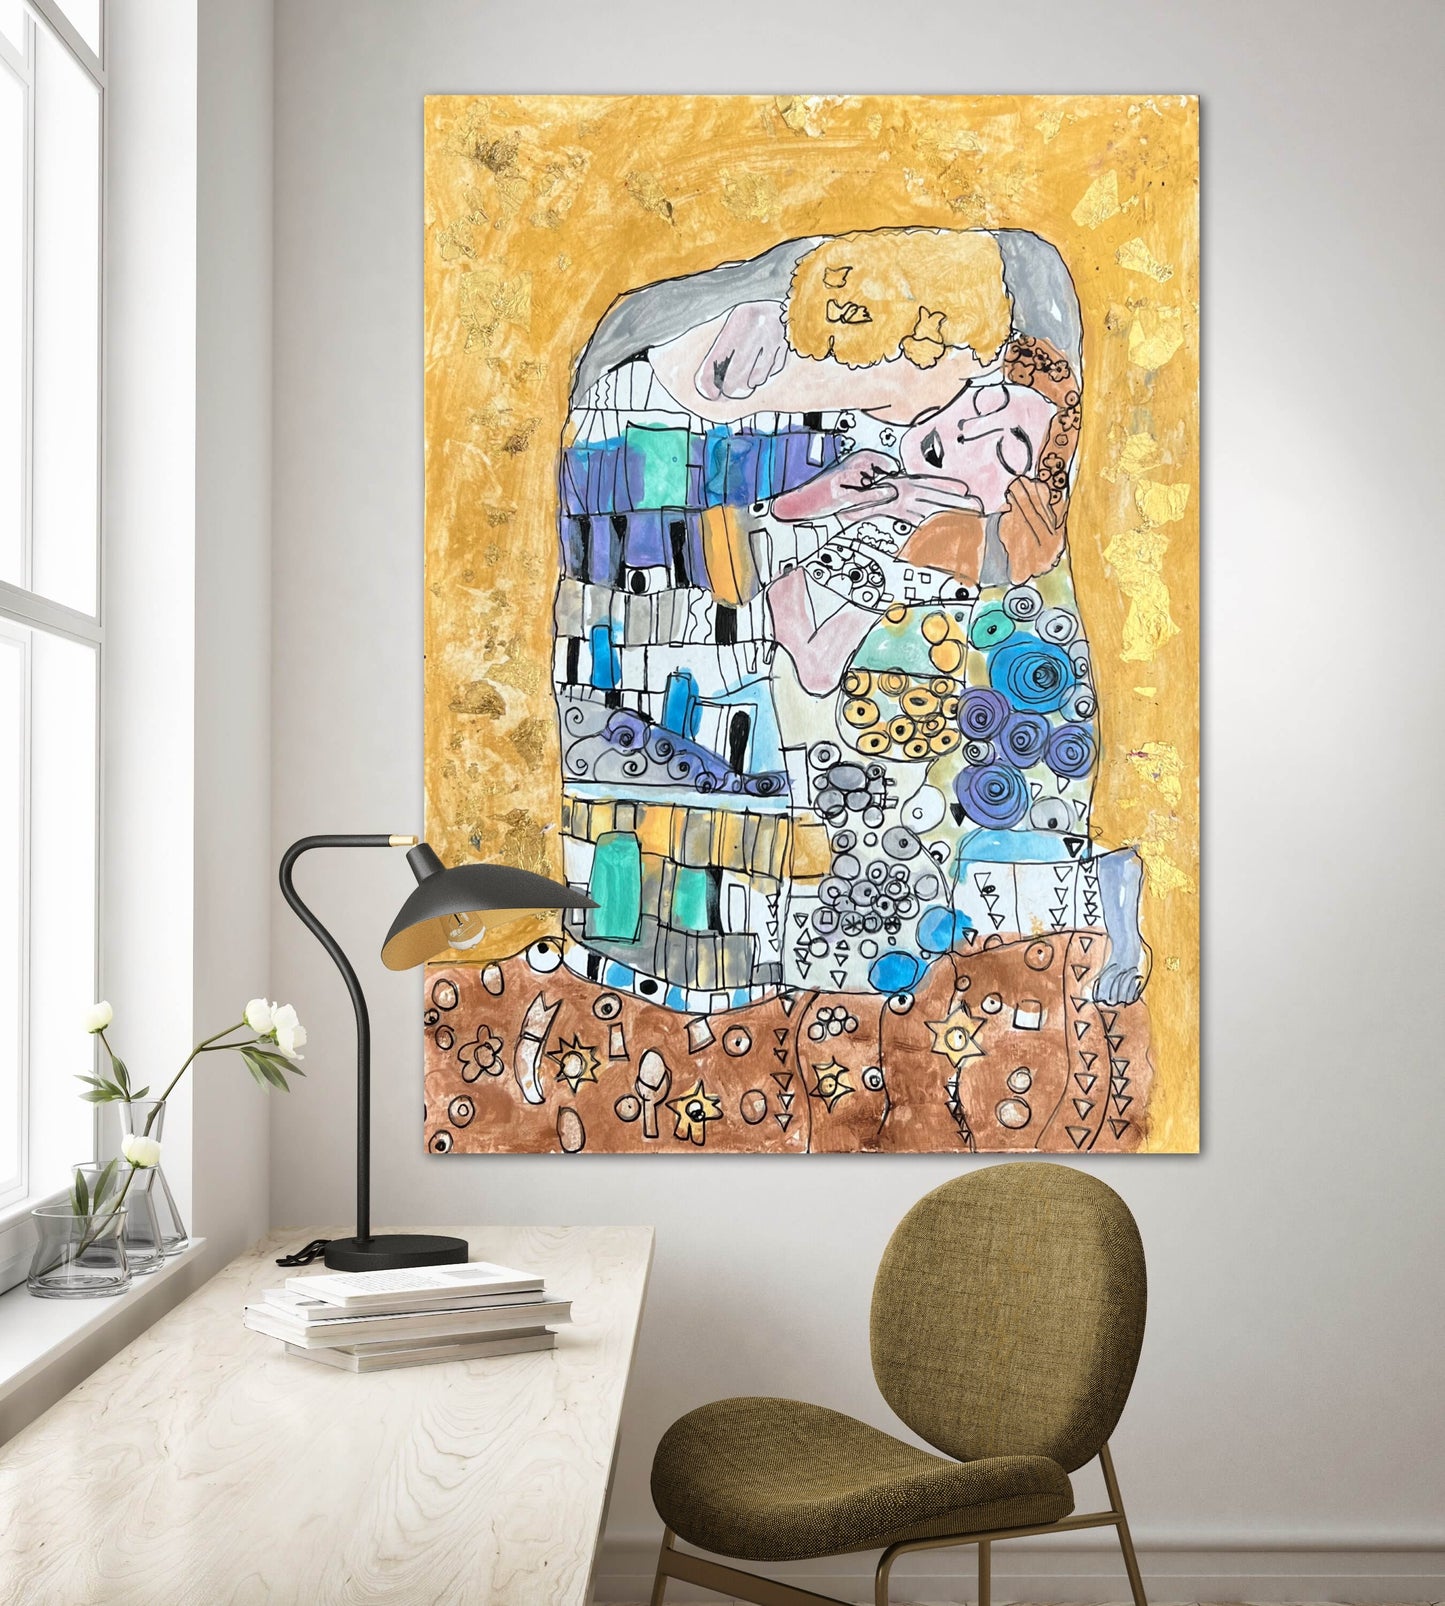 The Klimt Kiss by Viktor -  Print, Poster or Stretched Canvas Print in more sizes